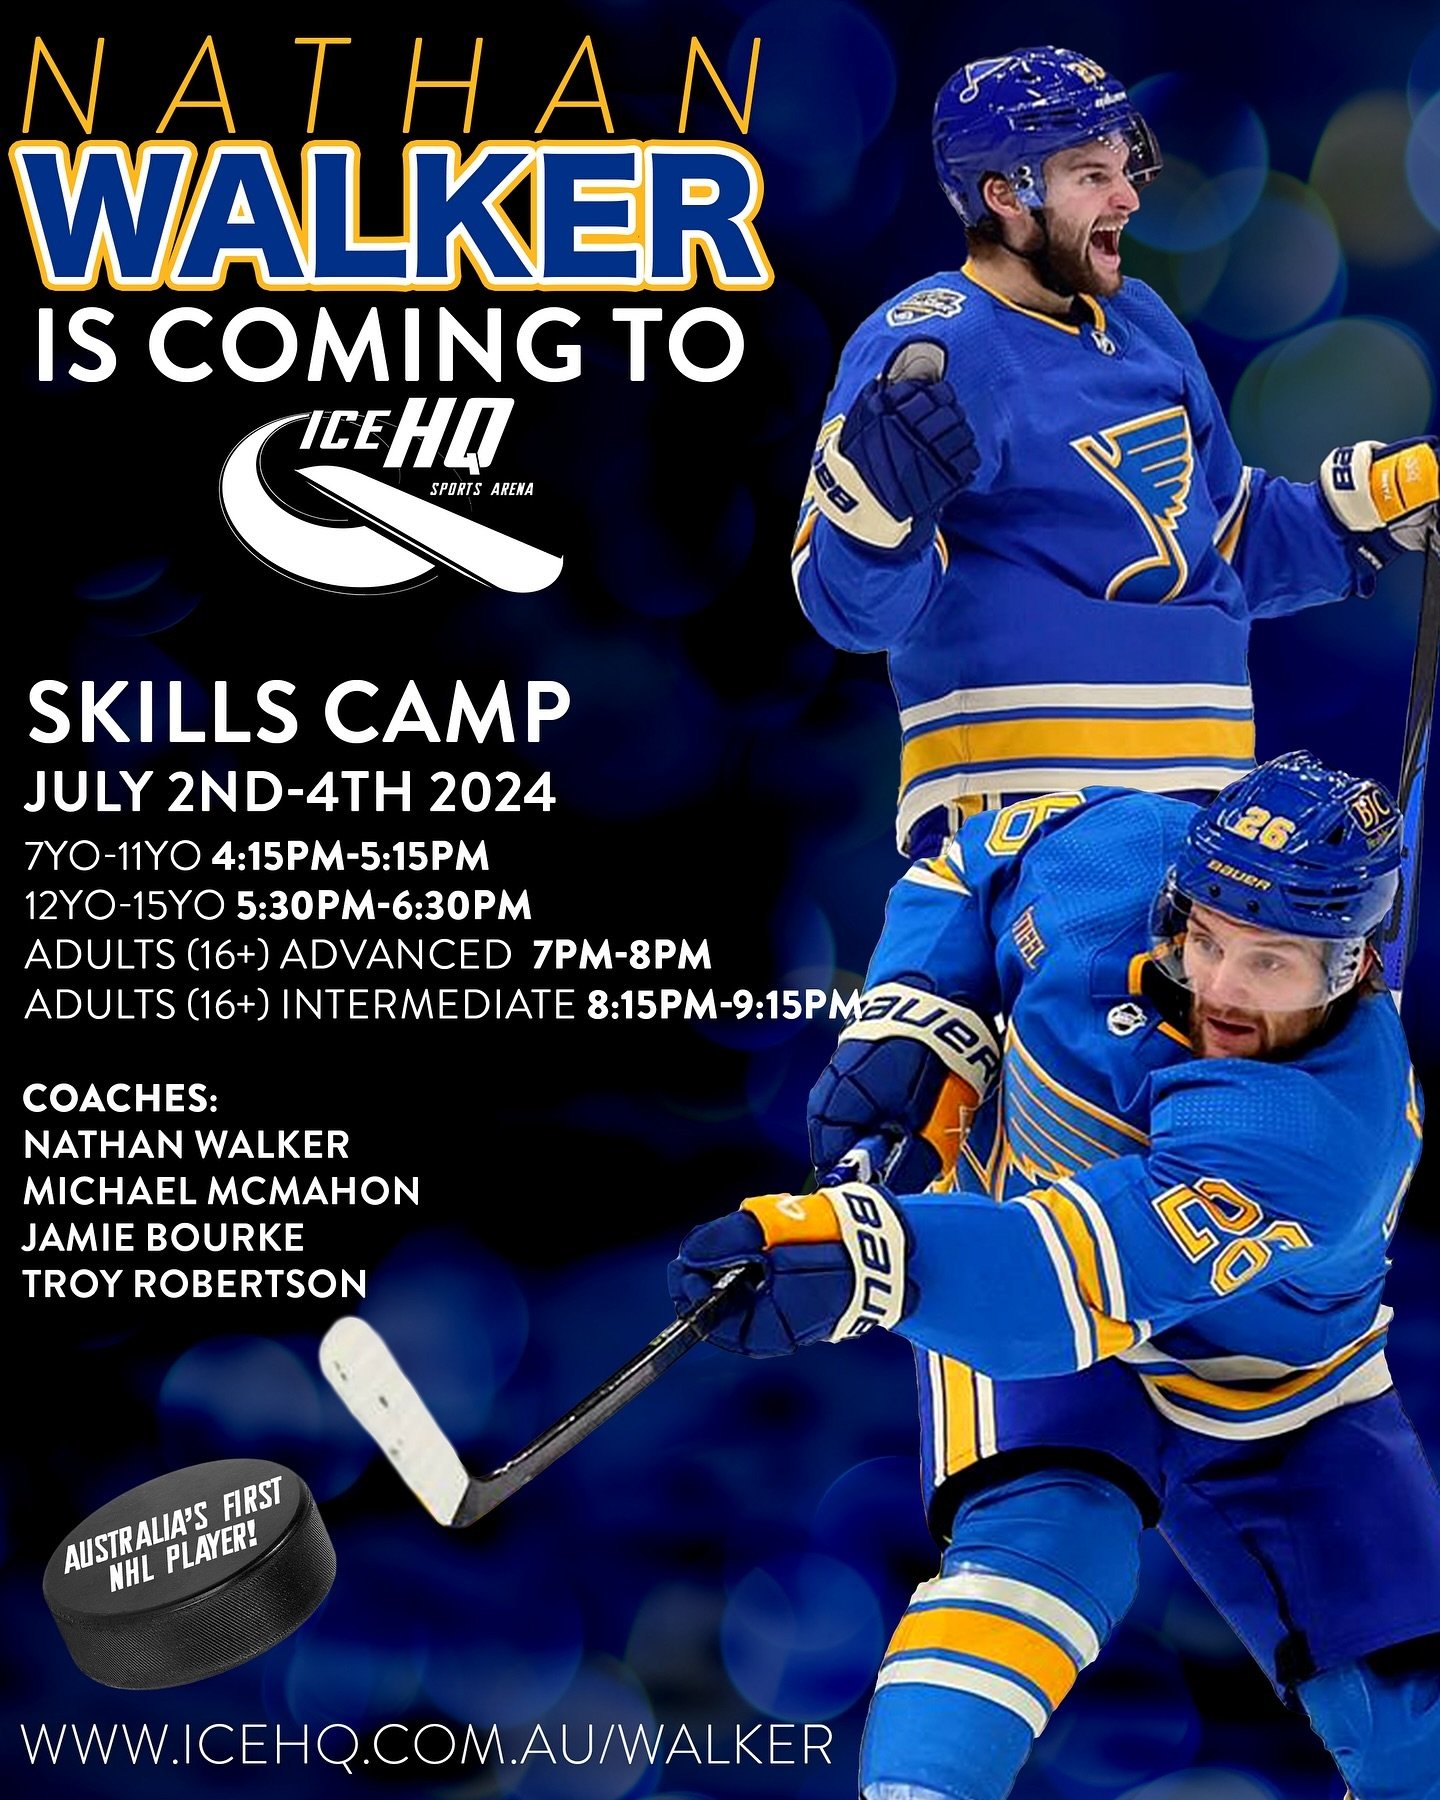 It&rsquo;s been tough keeping it under wraps, but we&rsquo;re ready to announce iceHQ&rsquo;s biggest news ever&hellip;
Nathan Walker is coming to iceHQ!

Do not miss this once in a lifetime opportunity to train with Australia&rsquo;s first NHL playe